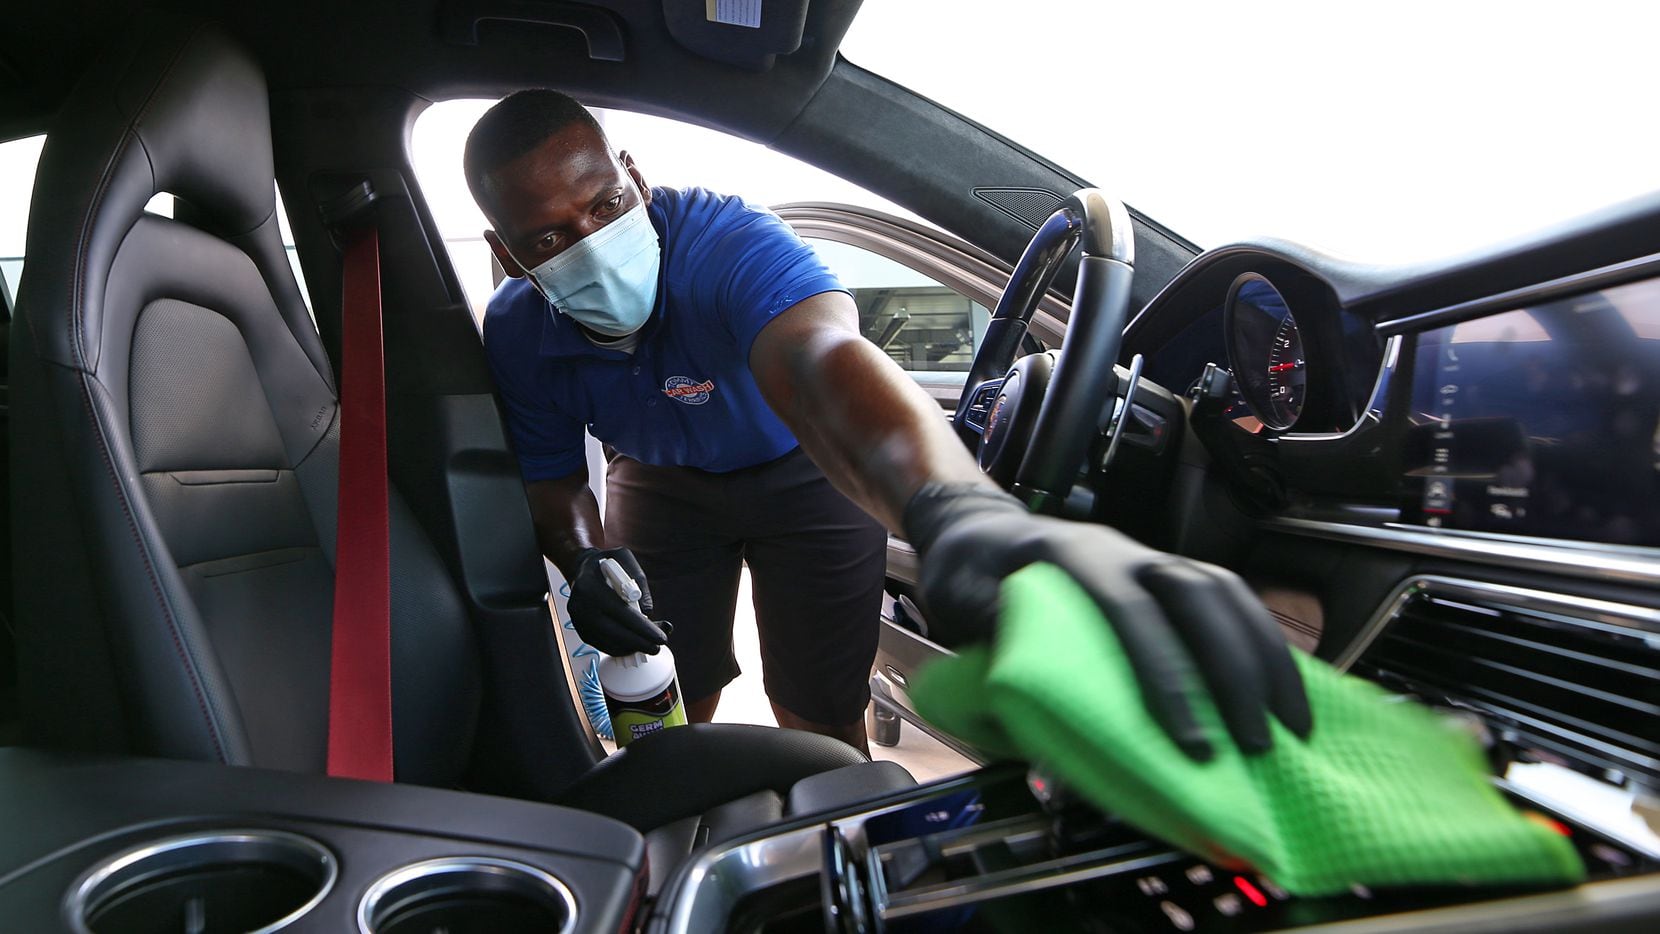 At Tommy Terrific's Car Wash in Plano, a worker cleans a vehicle while wearing a mask to...